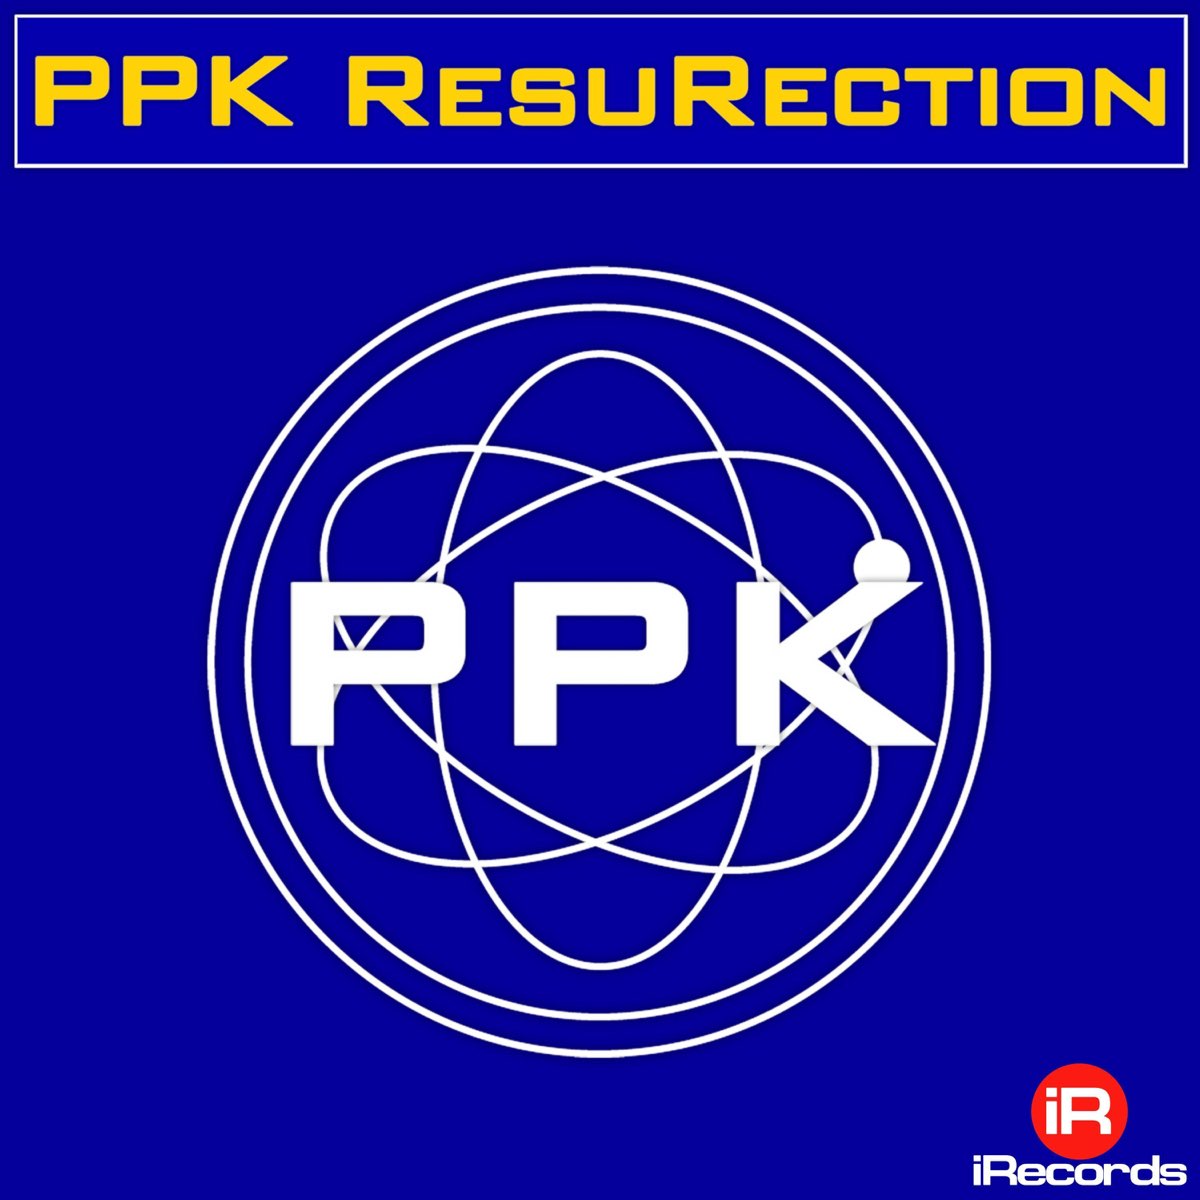 Resurection by PPK on Apple Music